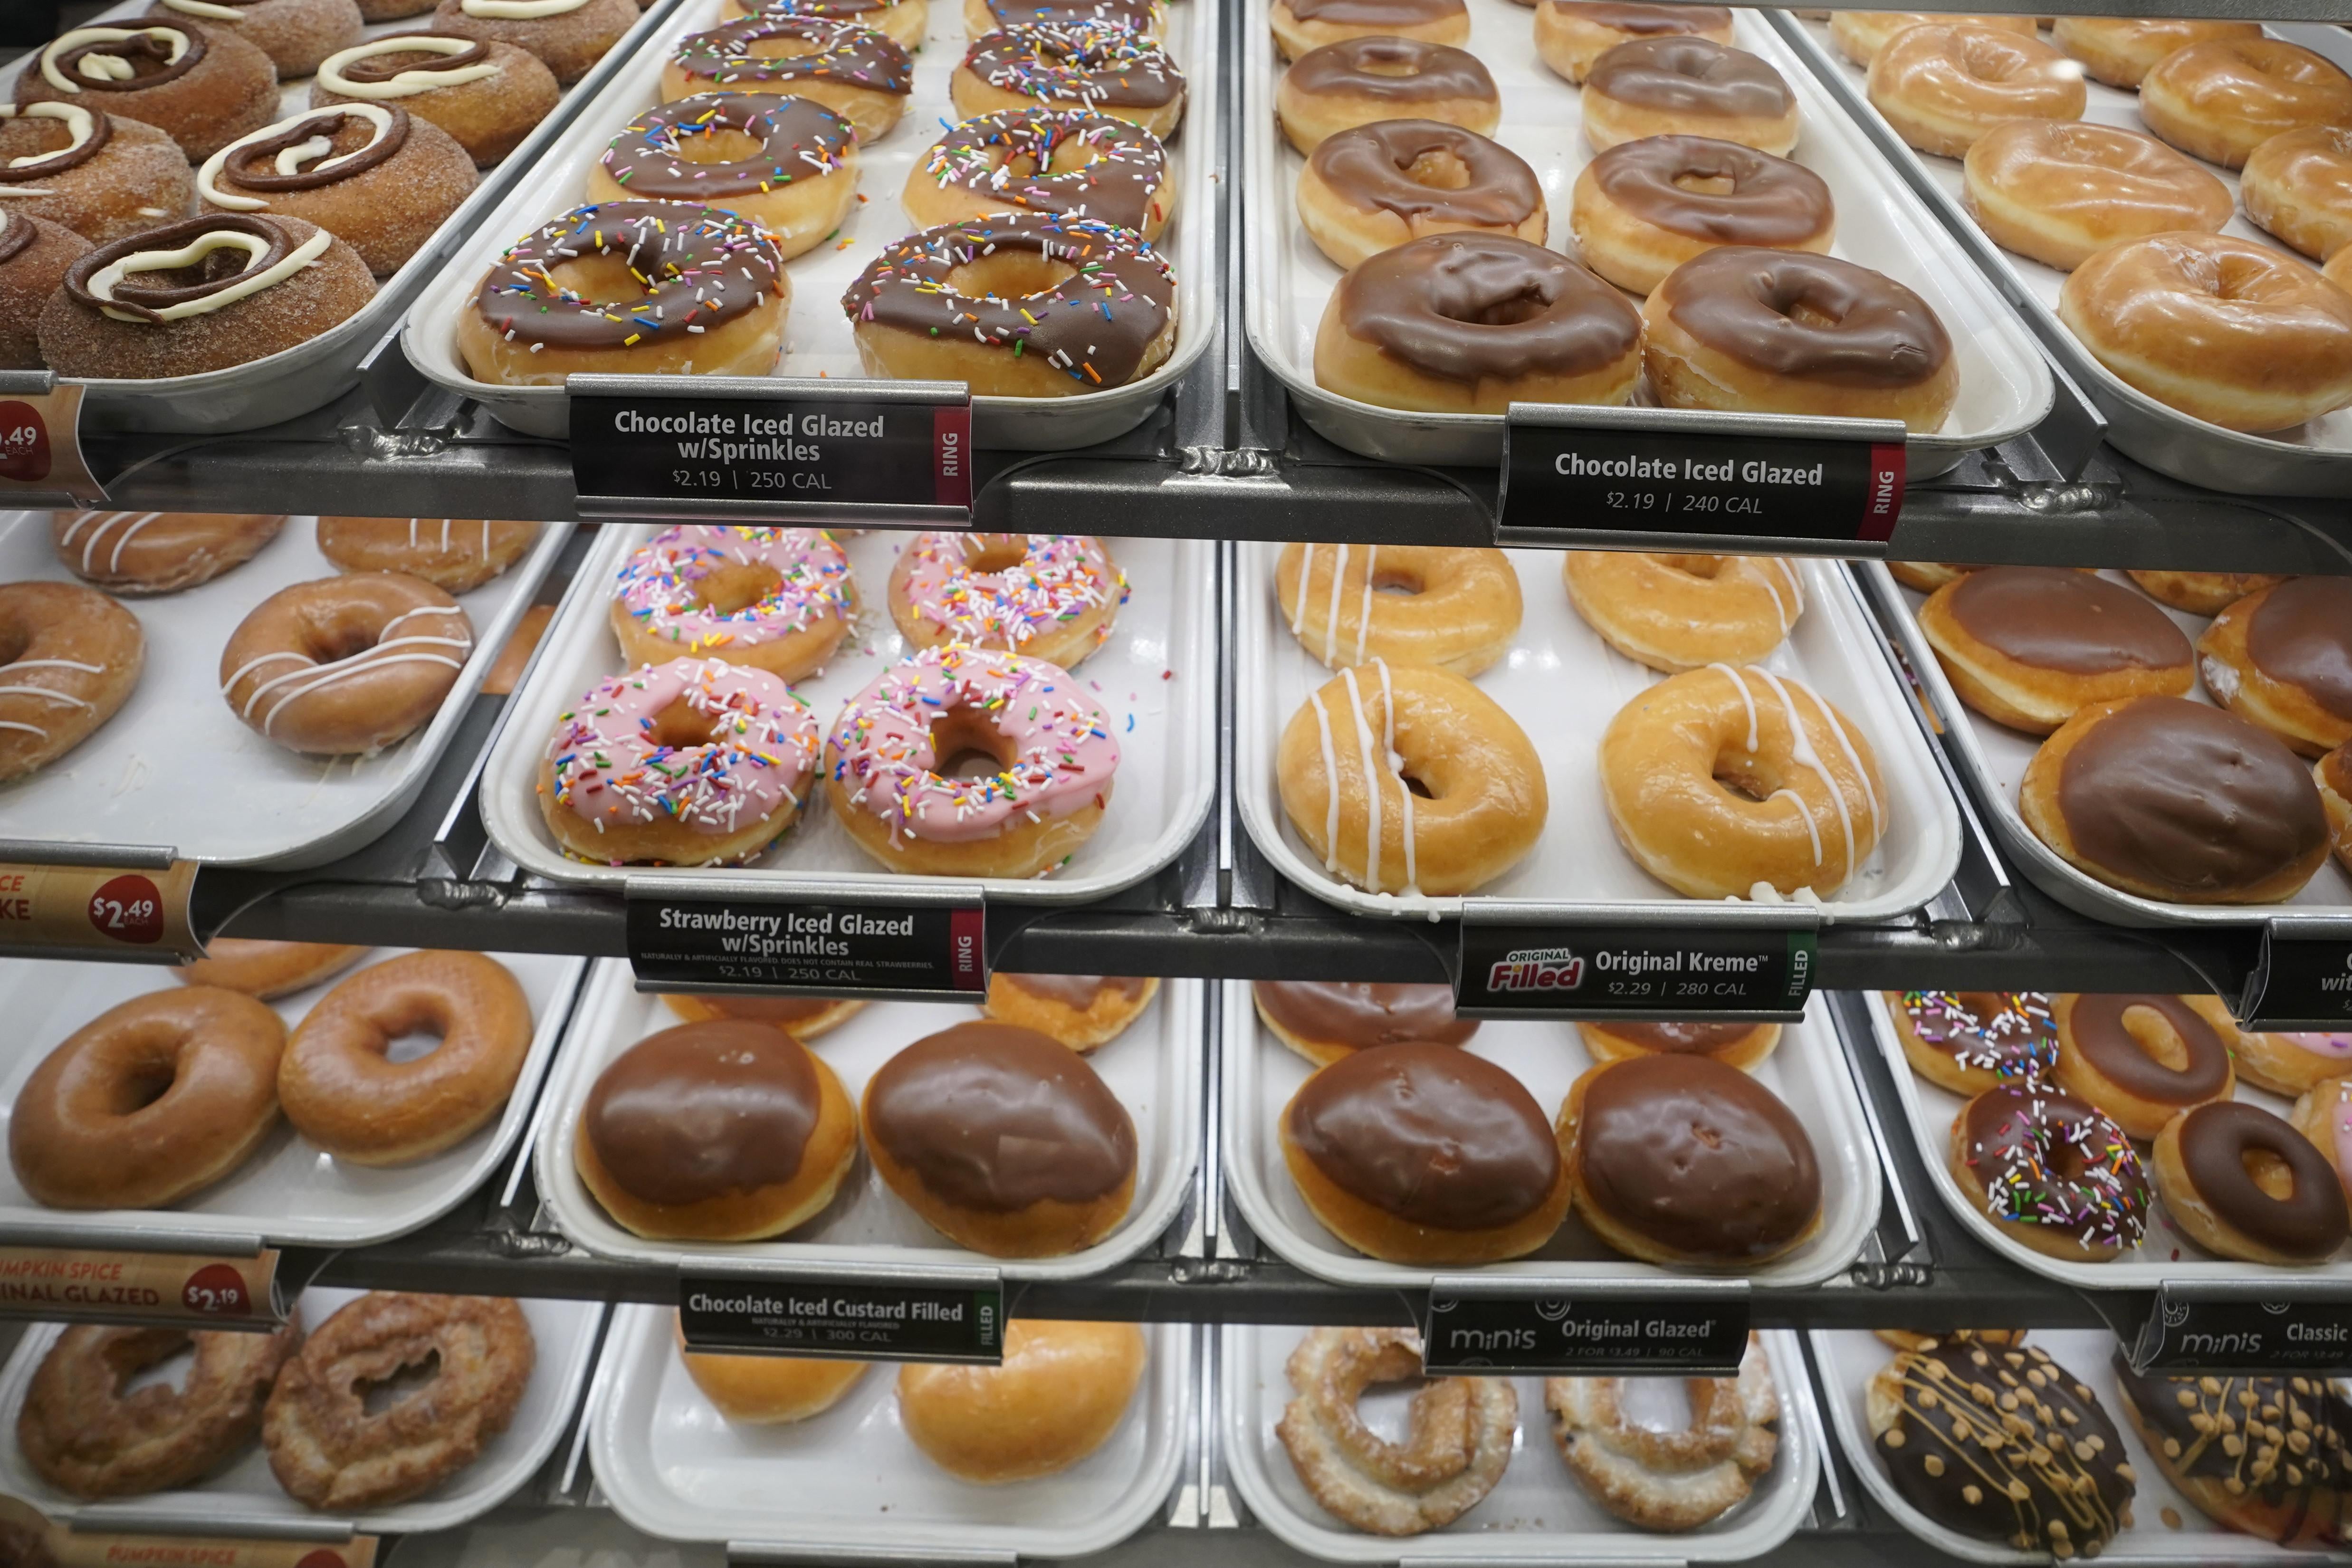 Rows of doughnuts on display.